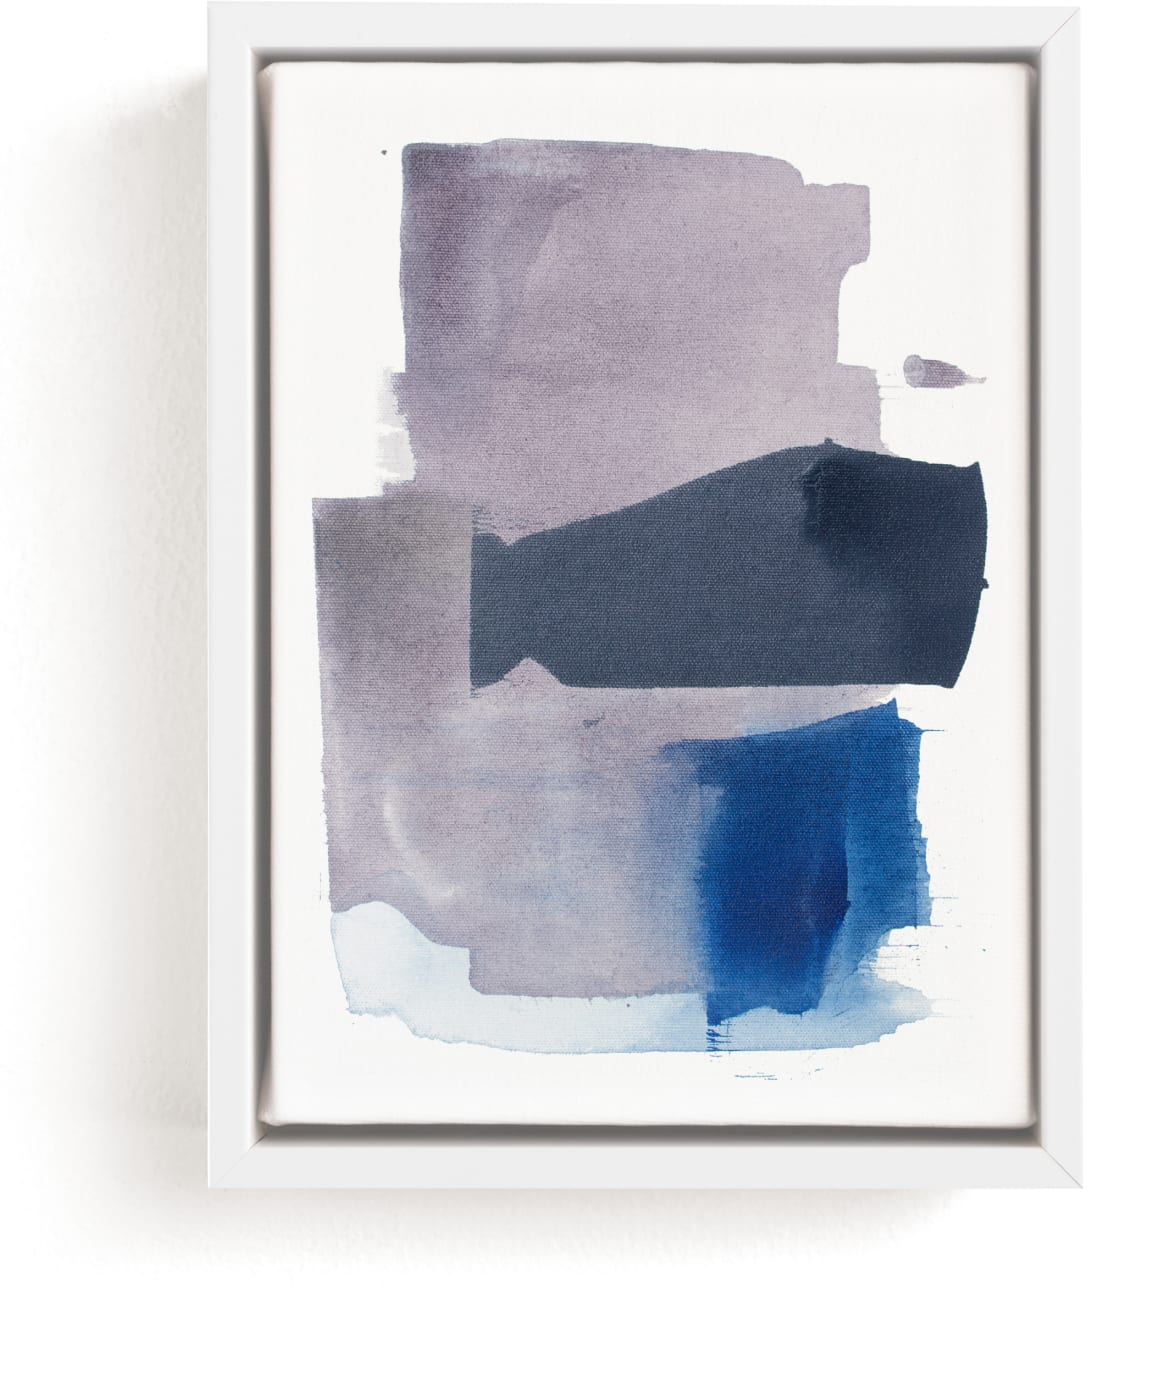 This is a blue art by Julia Contacessi called Pressed No. 3.